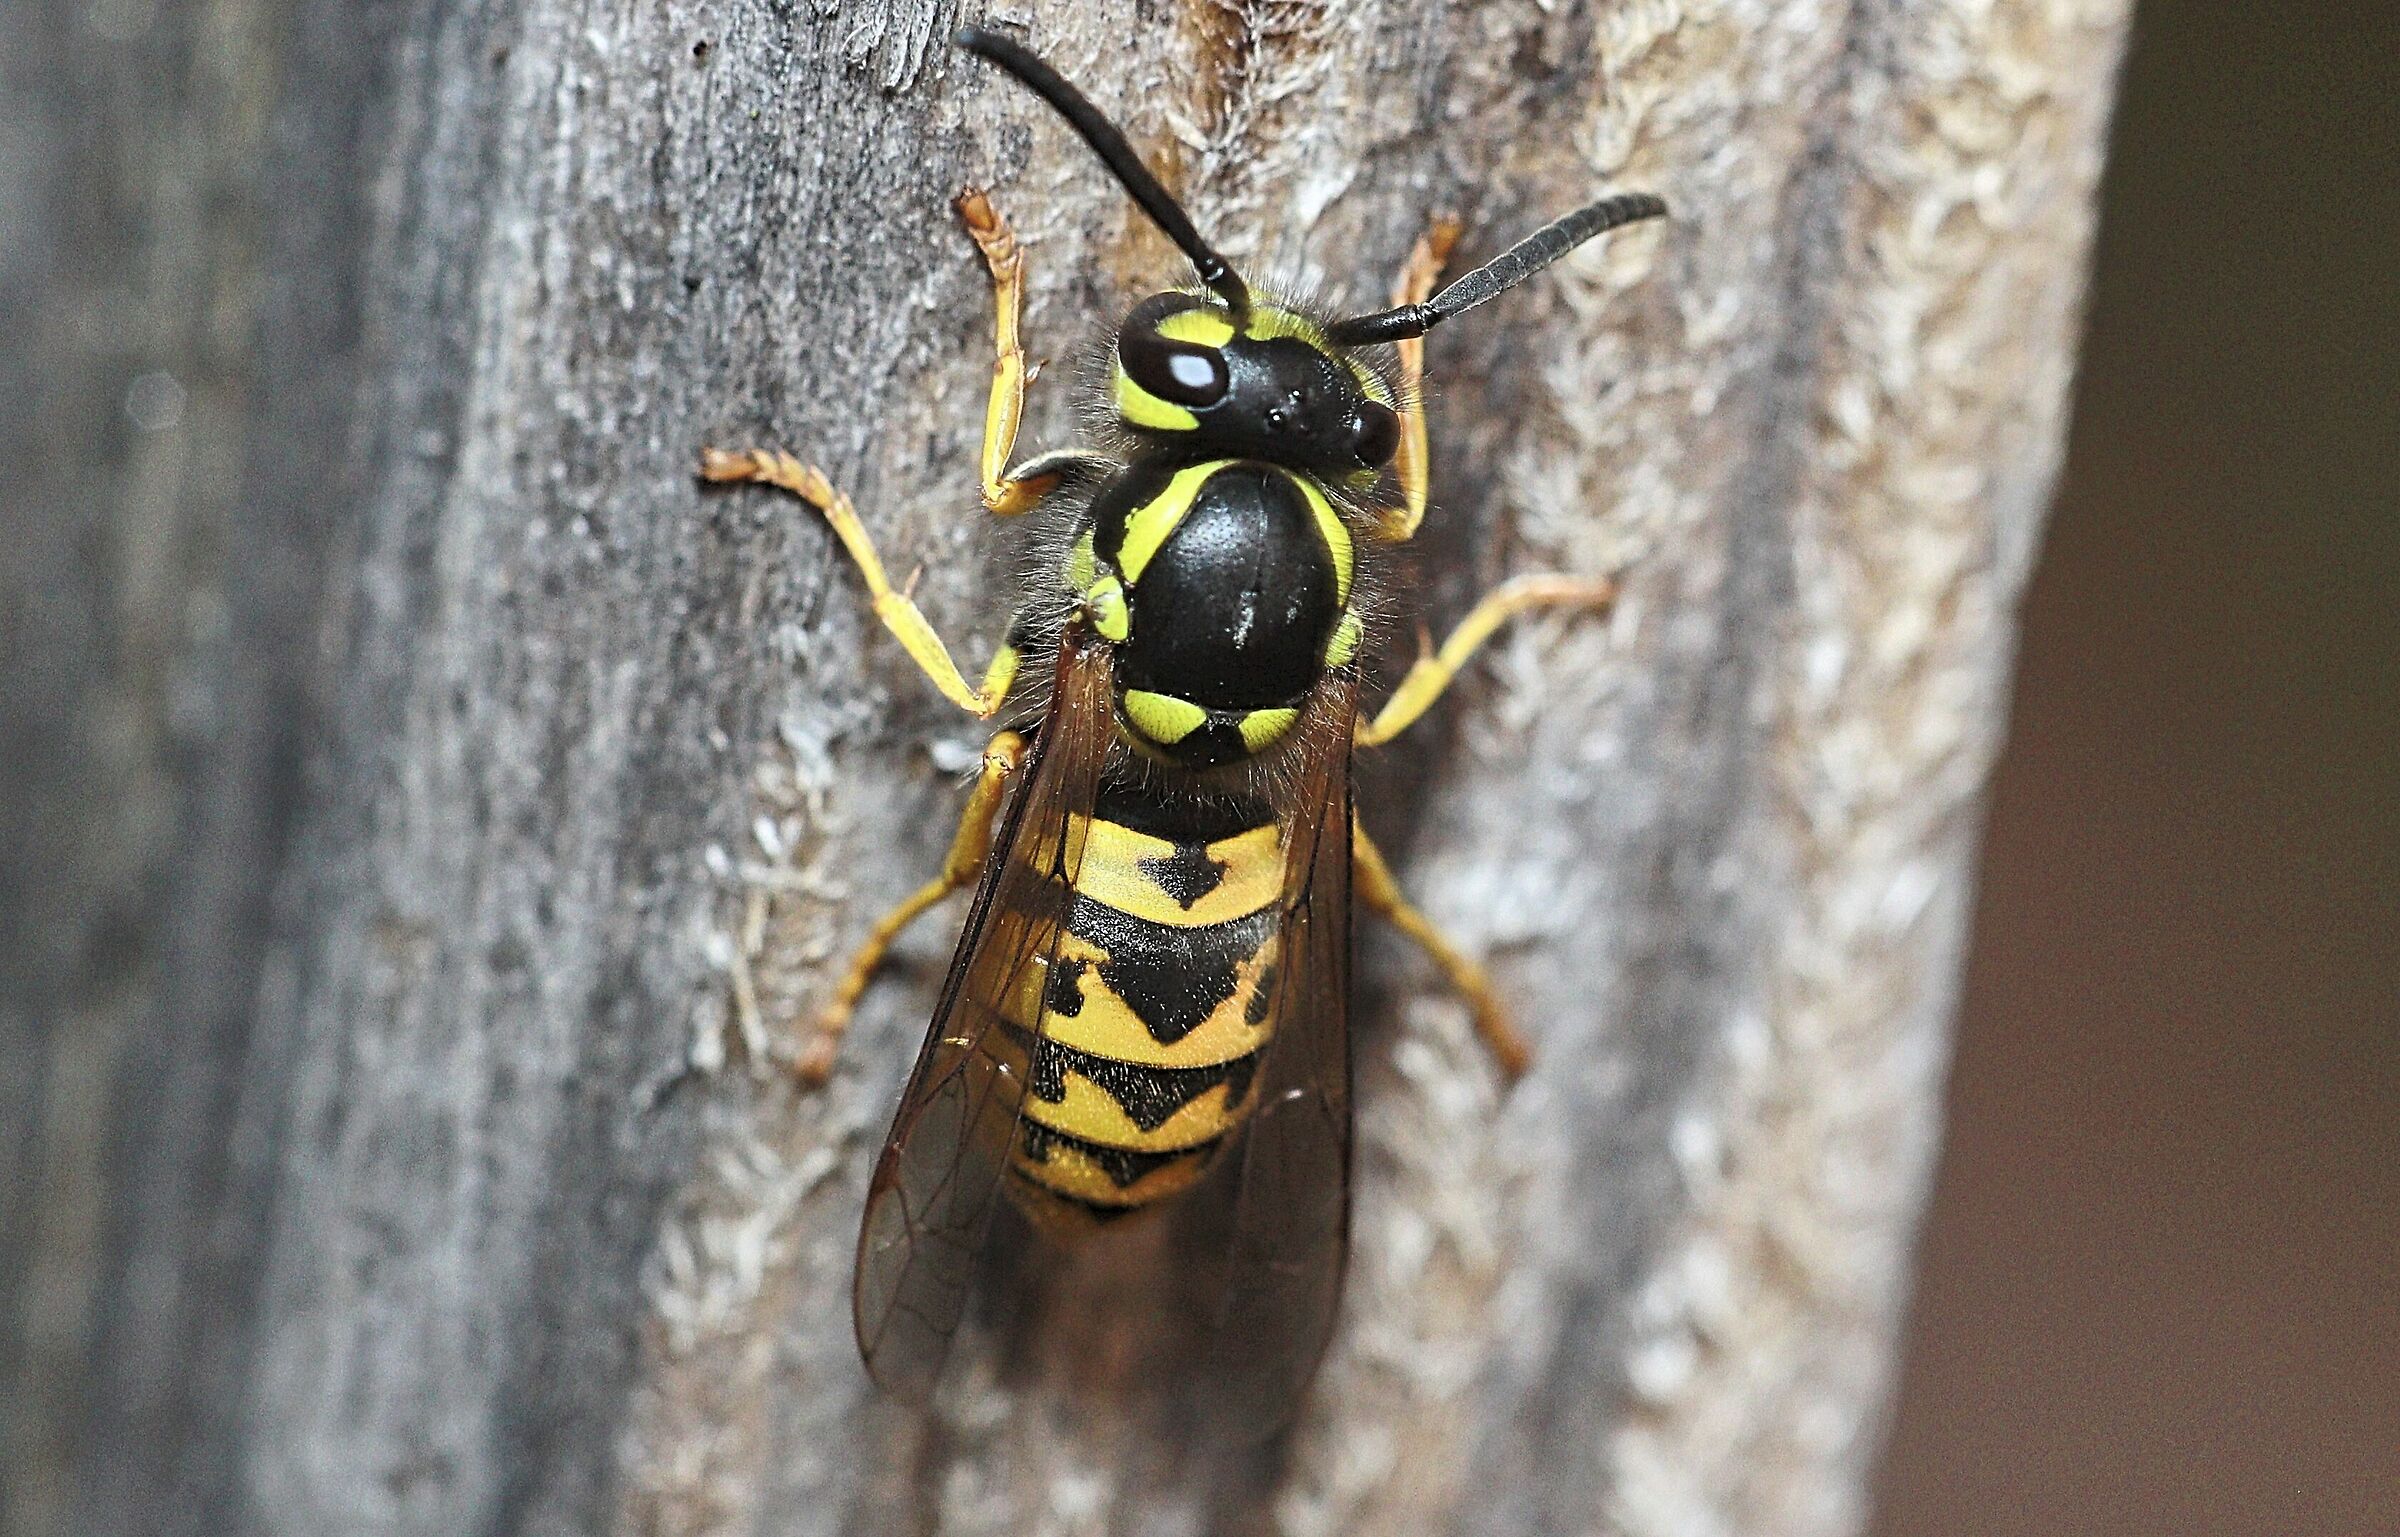 wasp on wood table in the garden 9/19/2020 ...